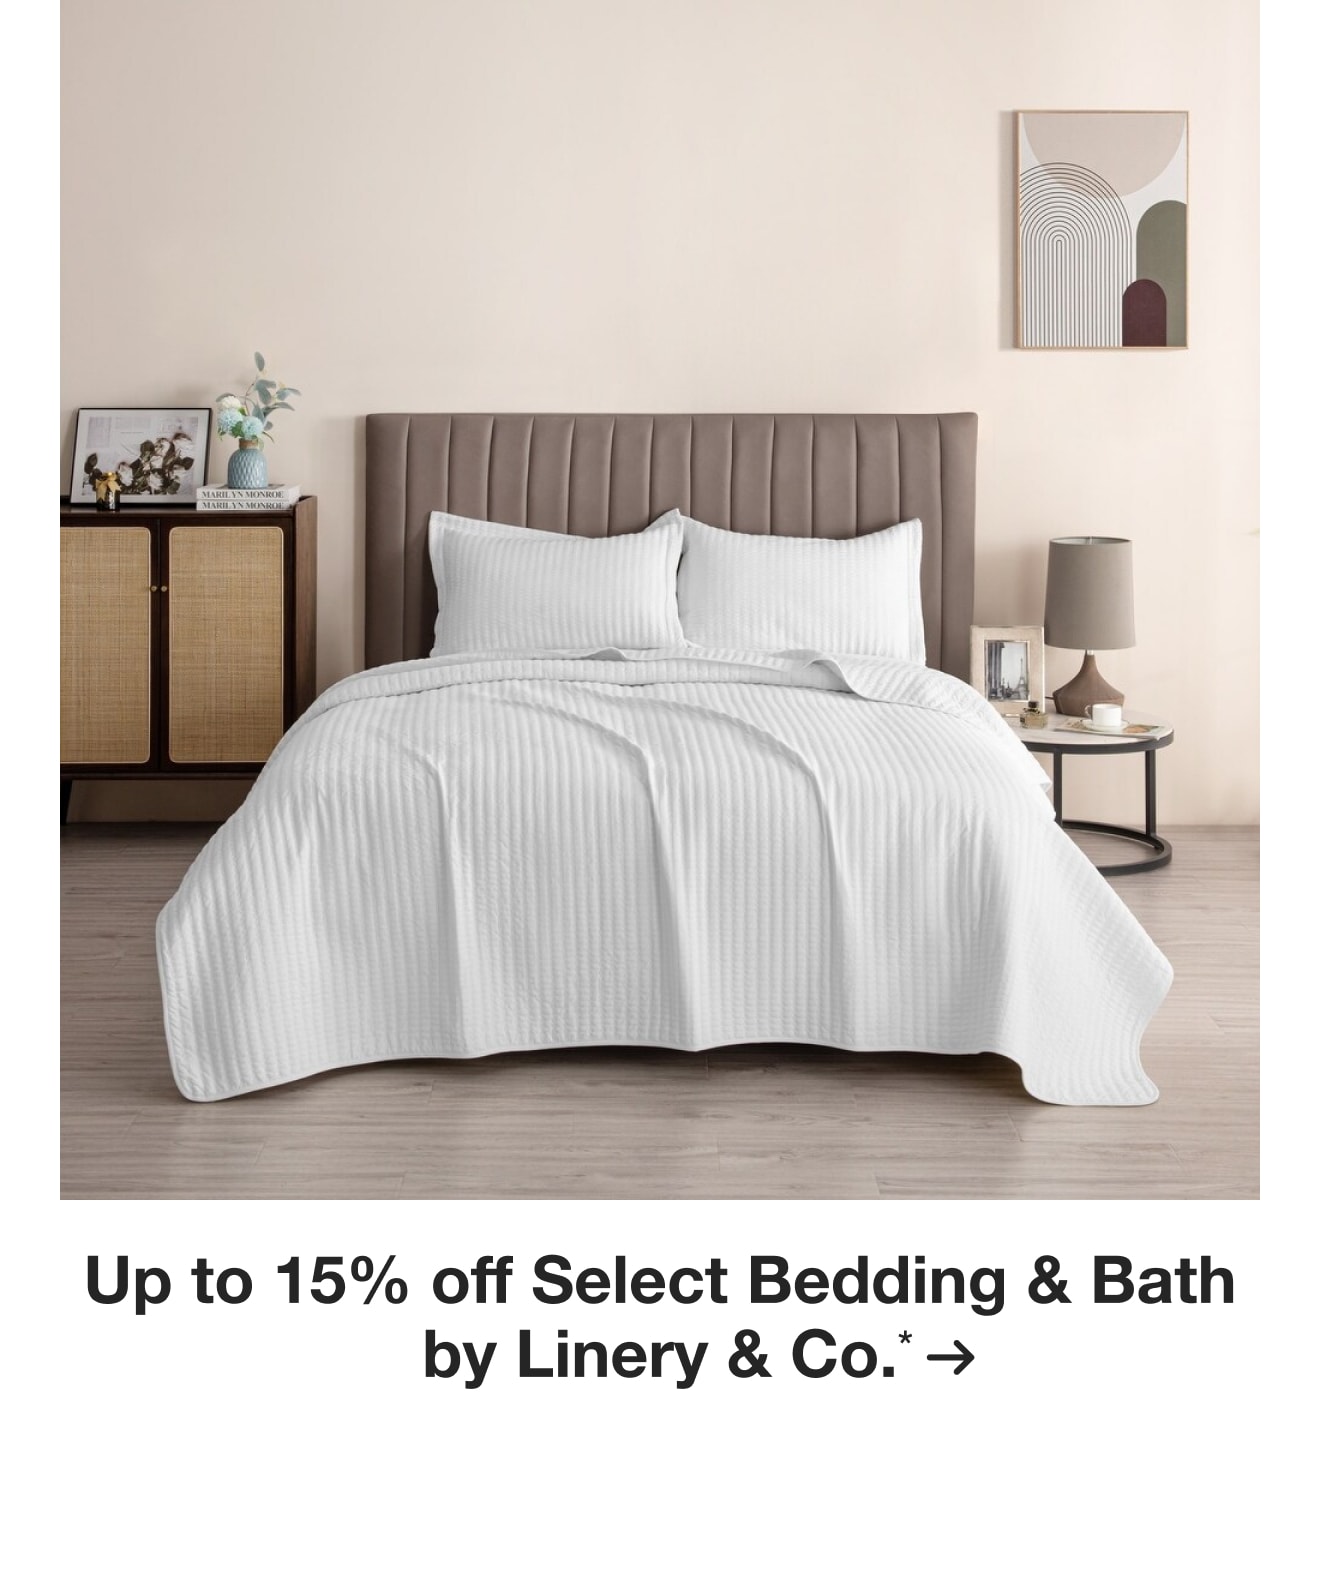 up to 15% off Select Bedding & Bath by Linery & Co.*